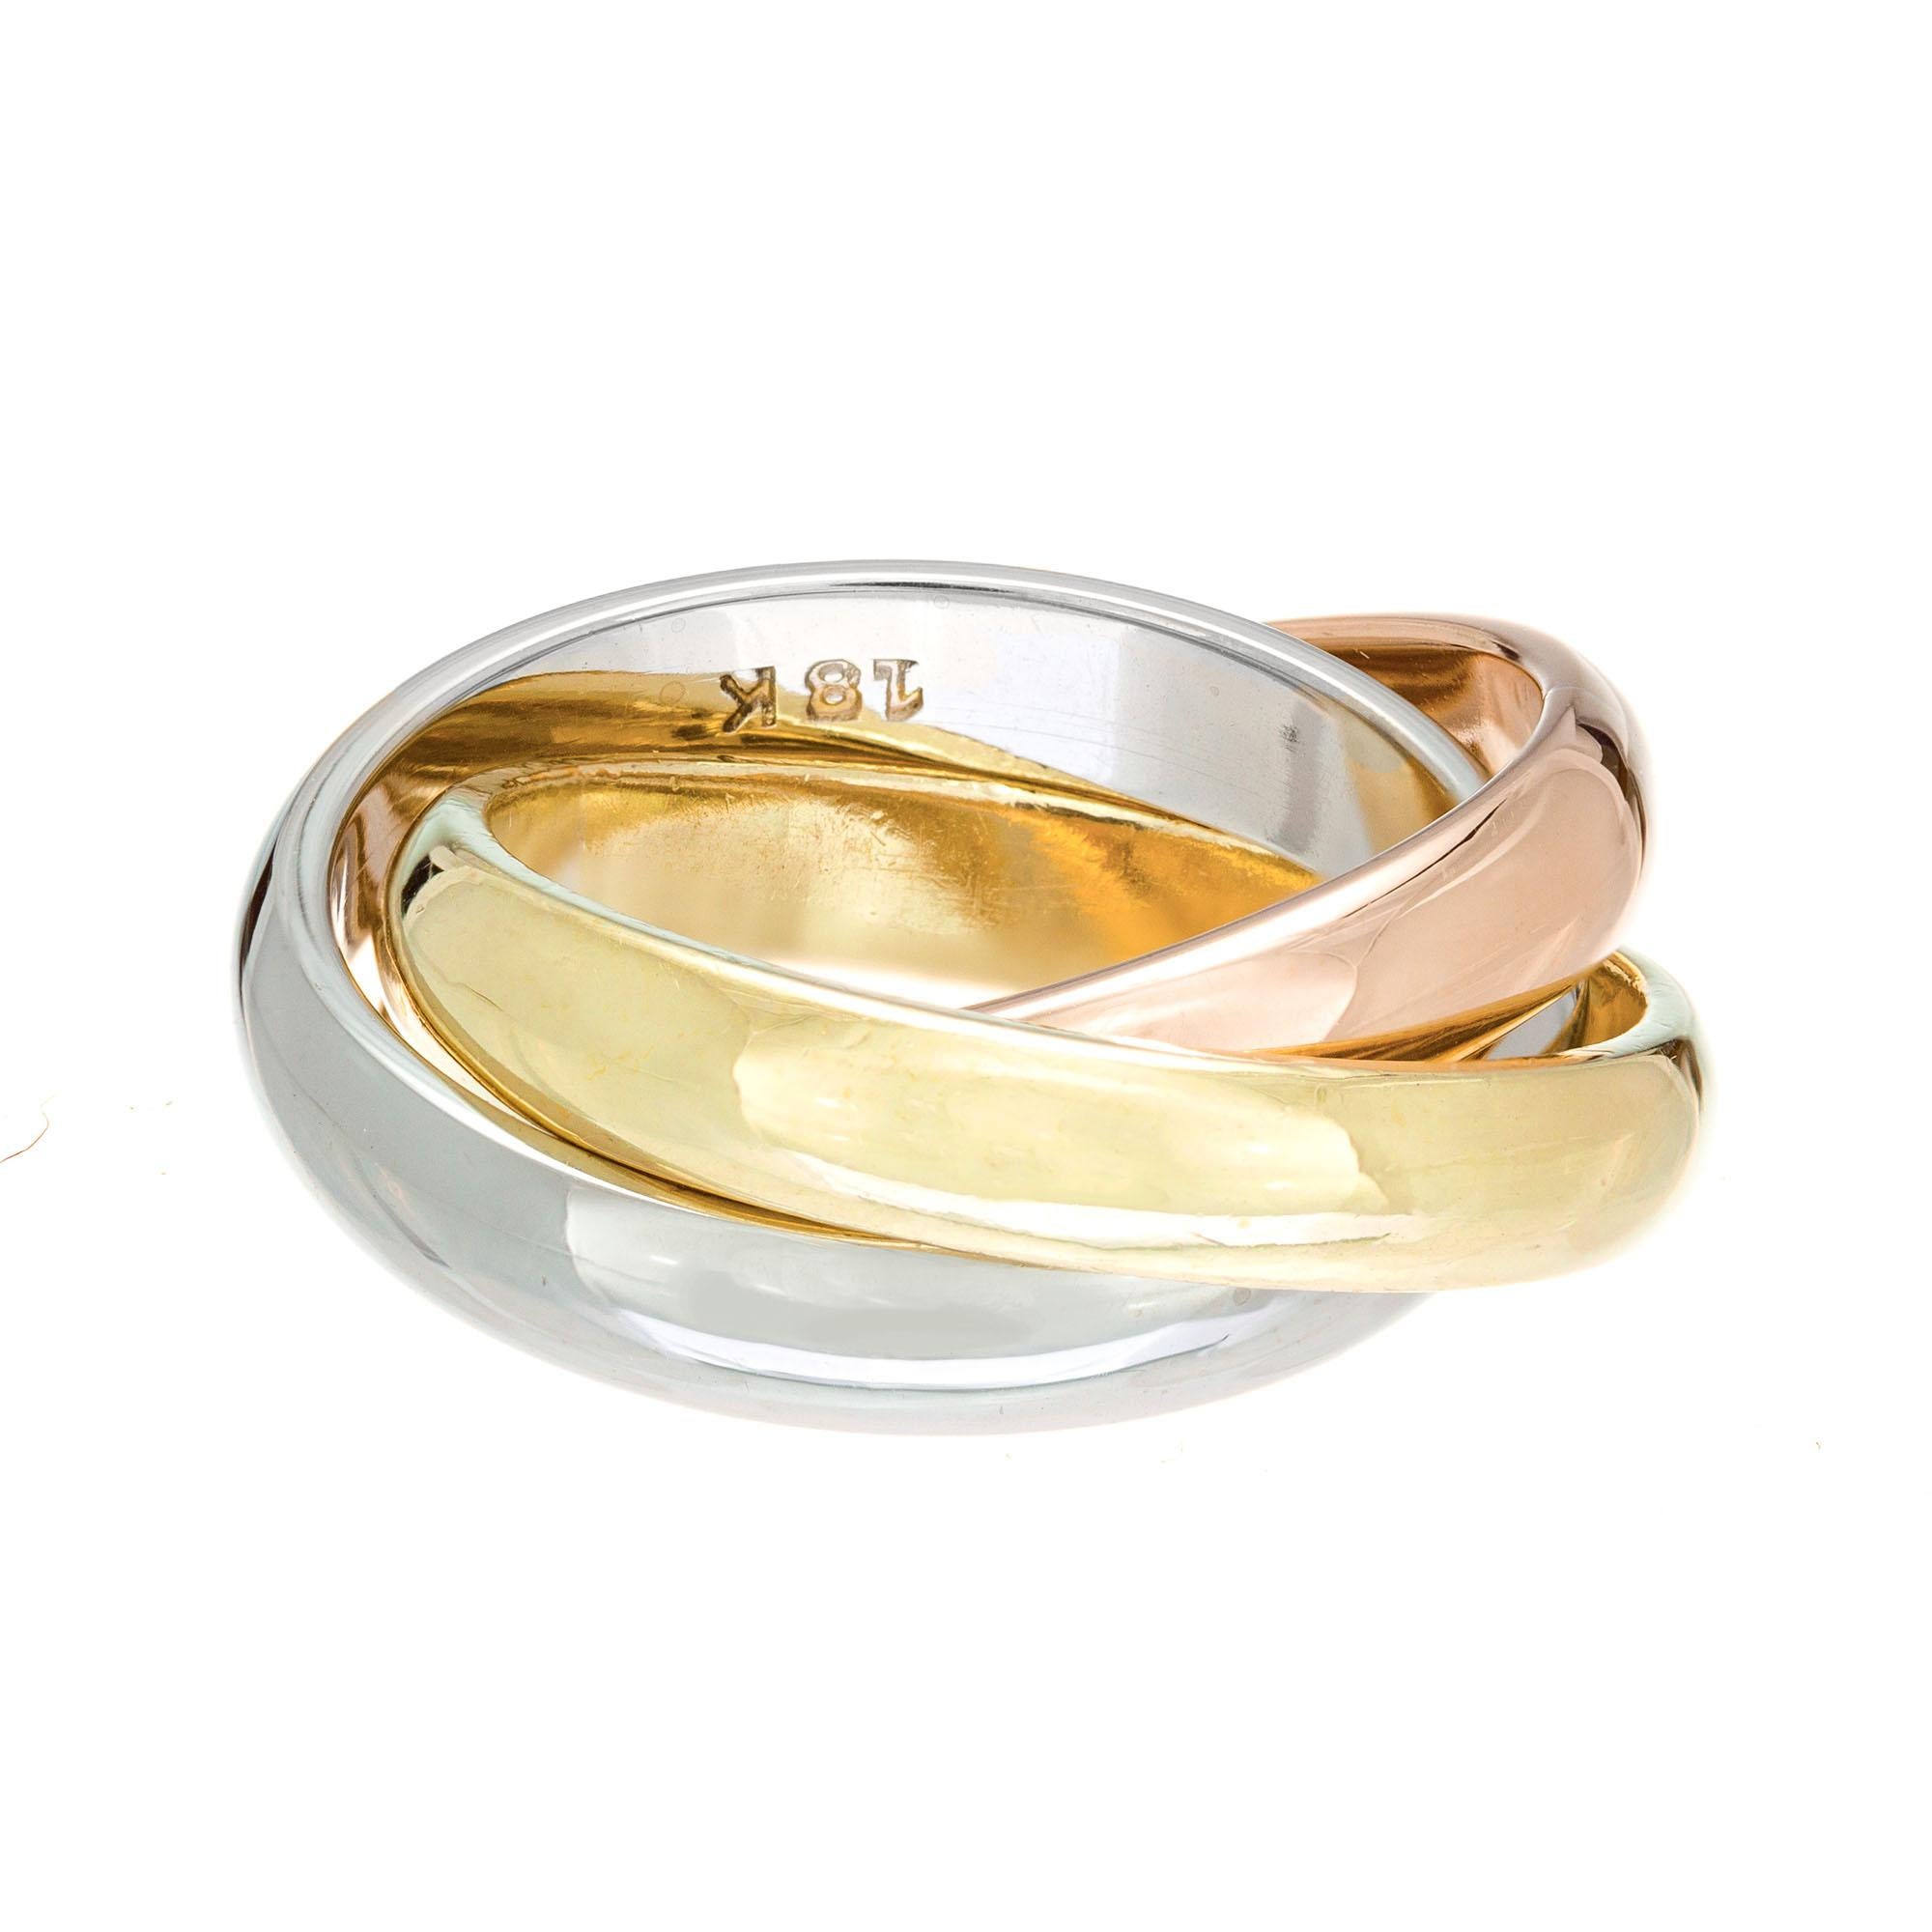 Cartier Trinity 3 band ring in 18k yellow gold, rose gold and white gold.

Size 4 and not easily sizable 
18k yellow gold
18k rose gold
18k white gold 
Stamped: 18k
Hallmark: Cartier
11.1 grams
Width at top: 3.4mm
Height at top: 1.47mm

